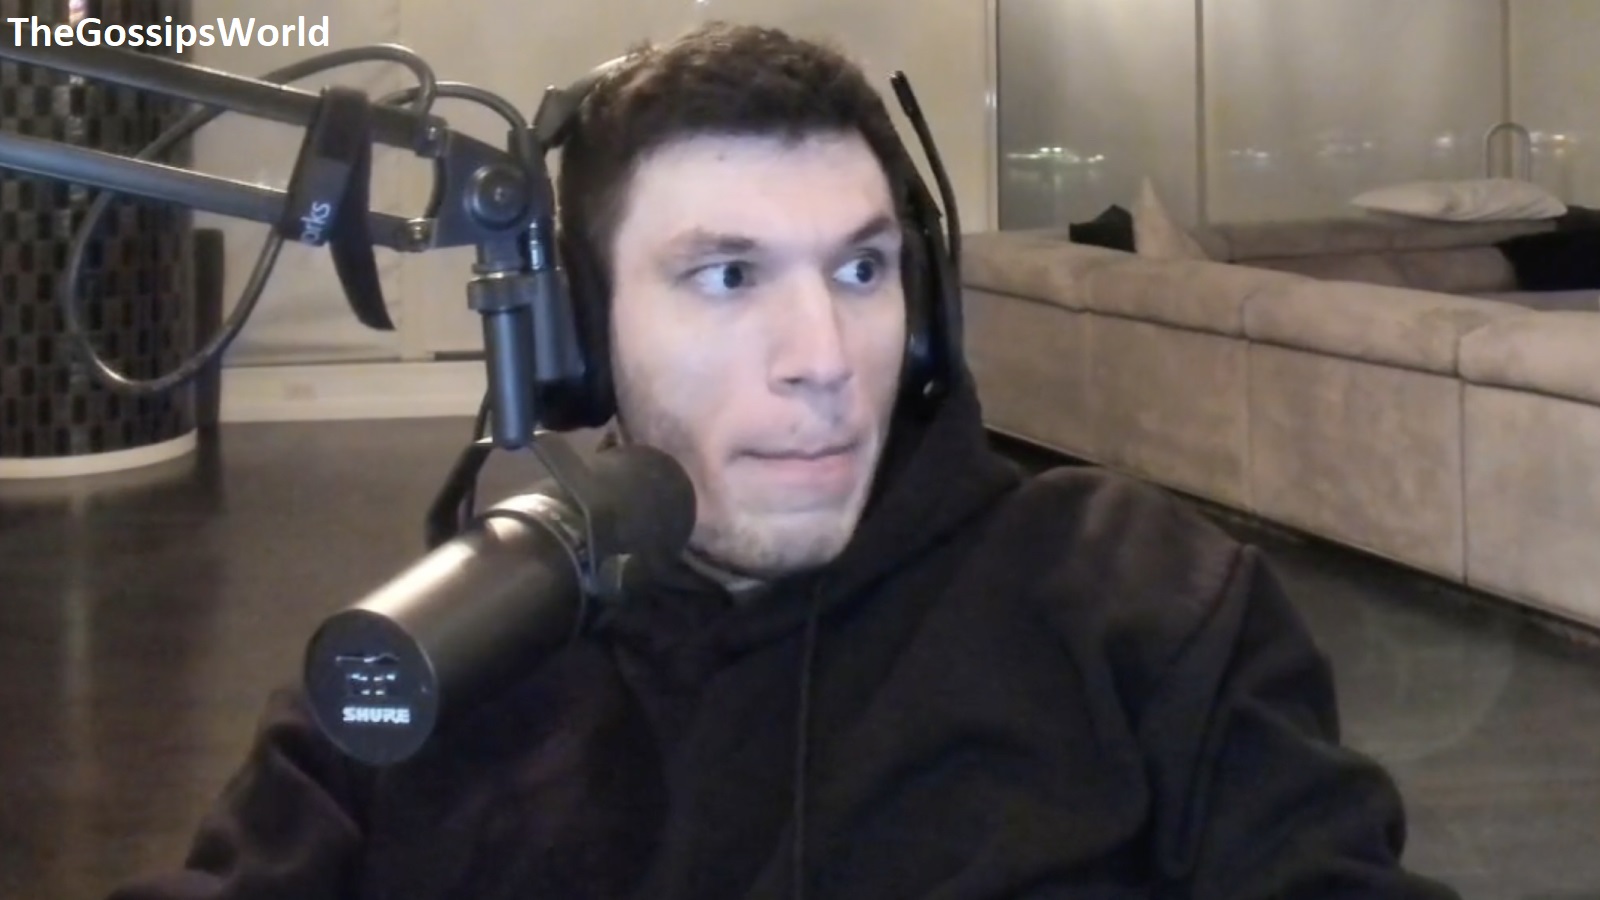 Why Did American Twitch Streamer "Trainwreckstv" Join It?